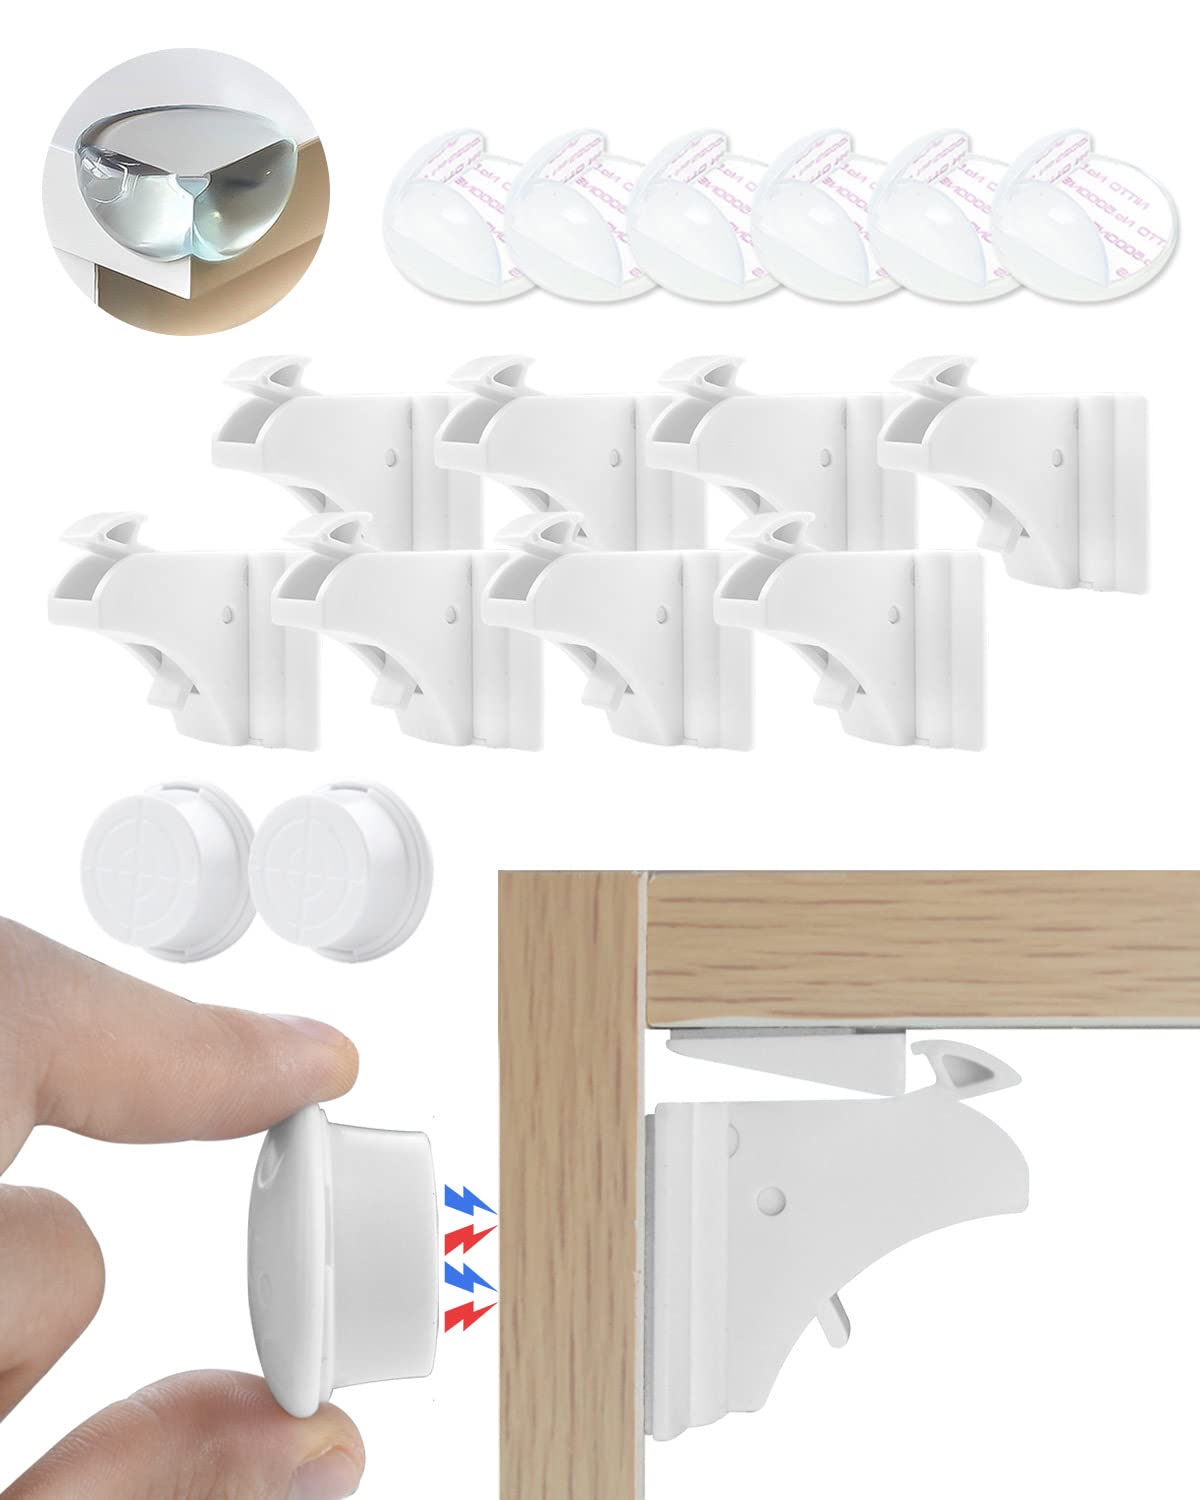 Trongle Safety Magnetic Cupboard Child Locks, 8 Locks 2 Keys 6 Corner Protector, Child Safety Cupboard Locks, Child Door Locks No Screws or Drilling, Easy Install, for Cupboards, Drawers and Fridge